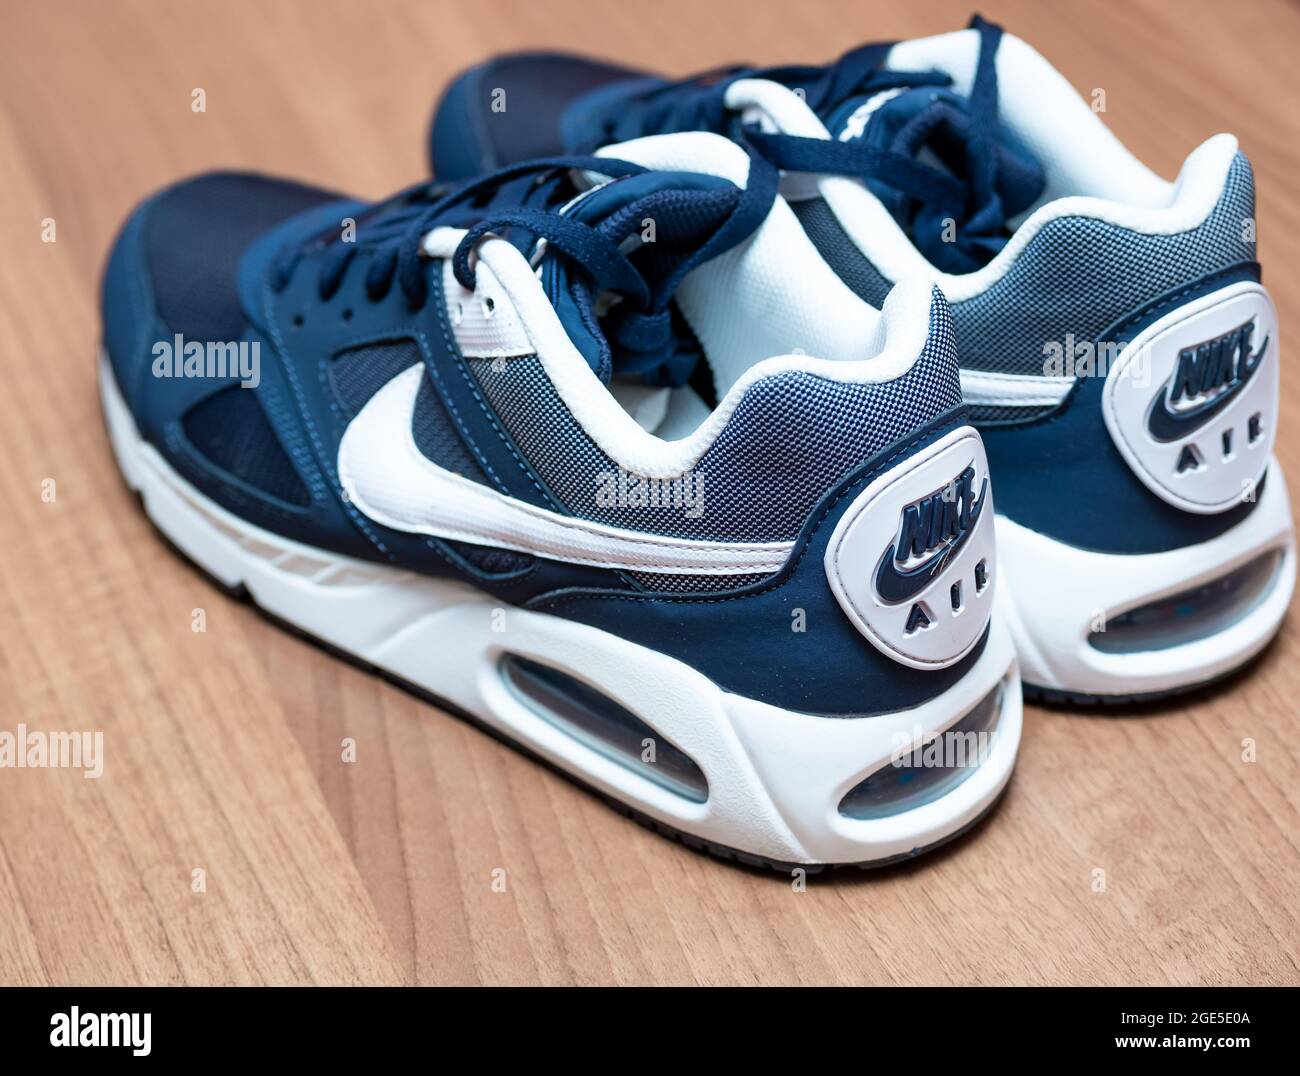 Norwich, Norfolk, UK – August 16 2021. Close and selective focus on navy blue Nike Air Max trainers or sneakers for men Stock Photo